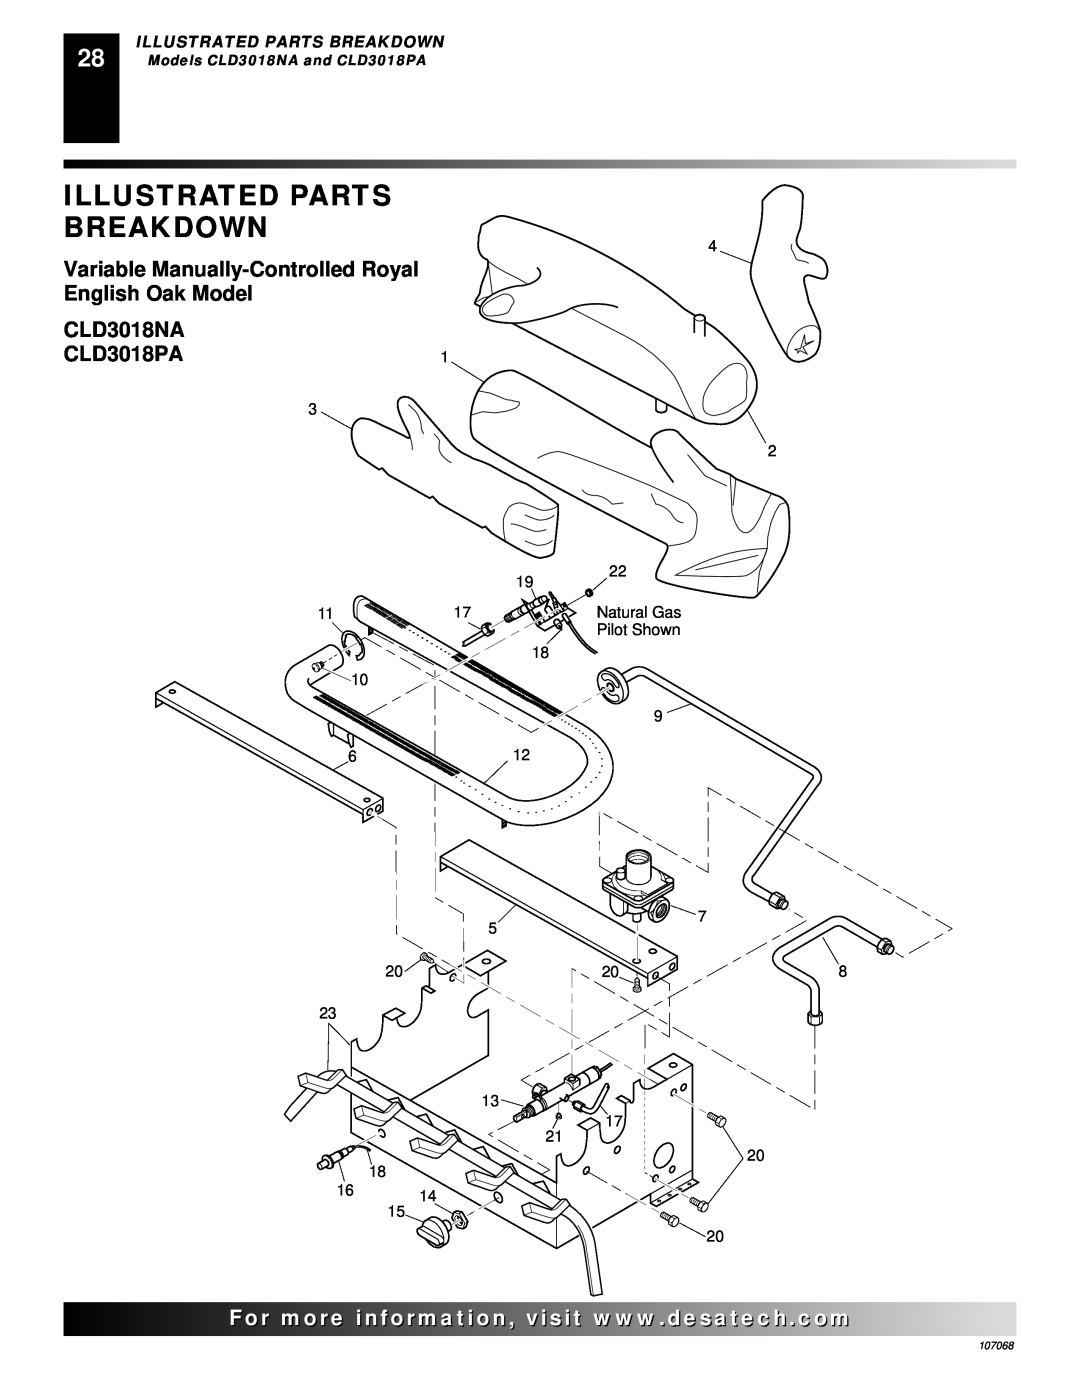 Desa CLD3924NTA, CLD3924PTA CLD3018NA CLD3018PA, Illustrated Parts Breakdown, Models CLD3018NA and CLD3018PA, 107068 